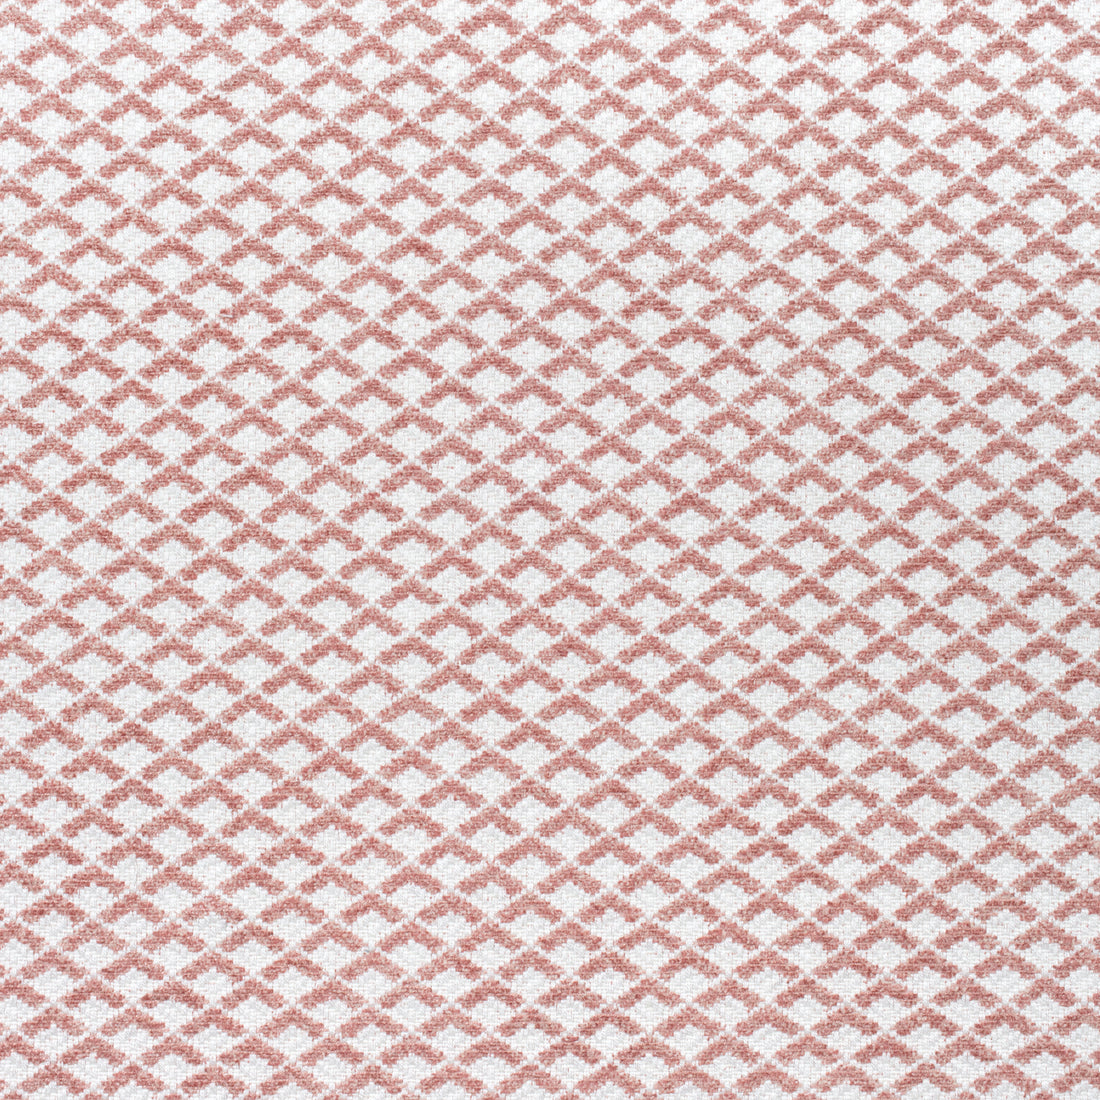 Scala fabric in blush color - pattern number W80727 - by Thibaut in the Woven Resource 11: Rialto collection